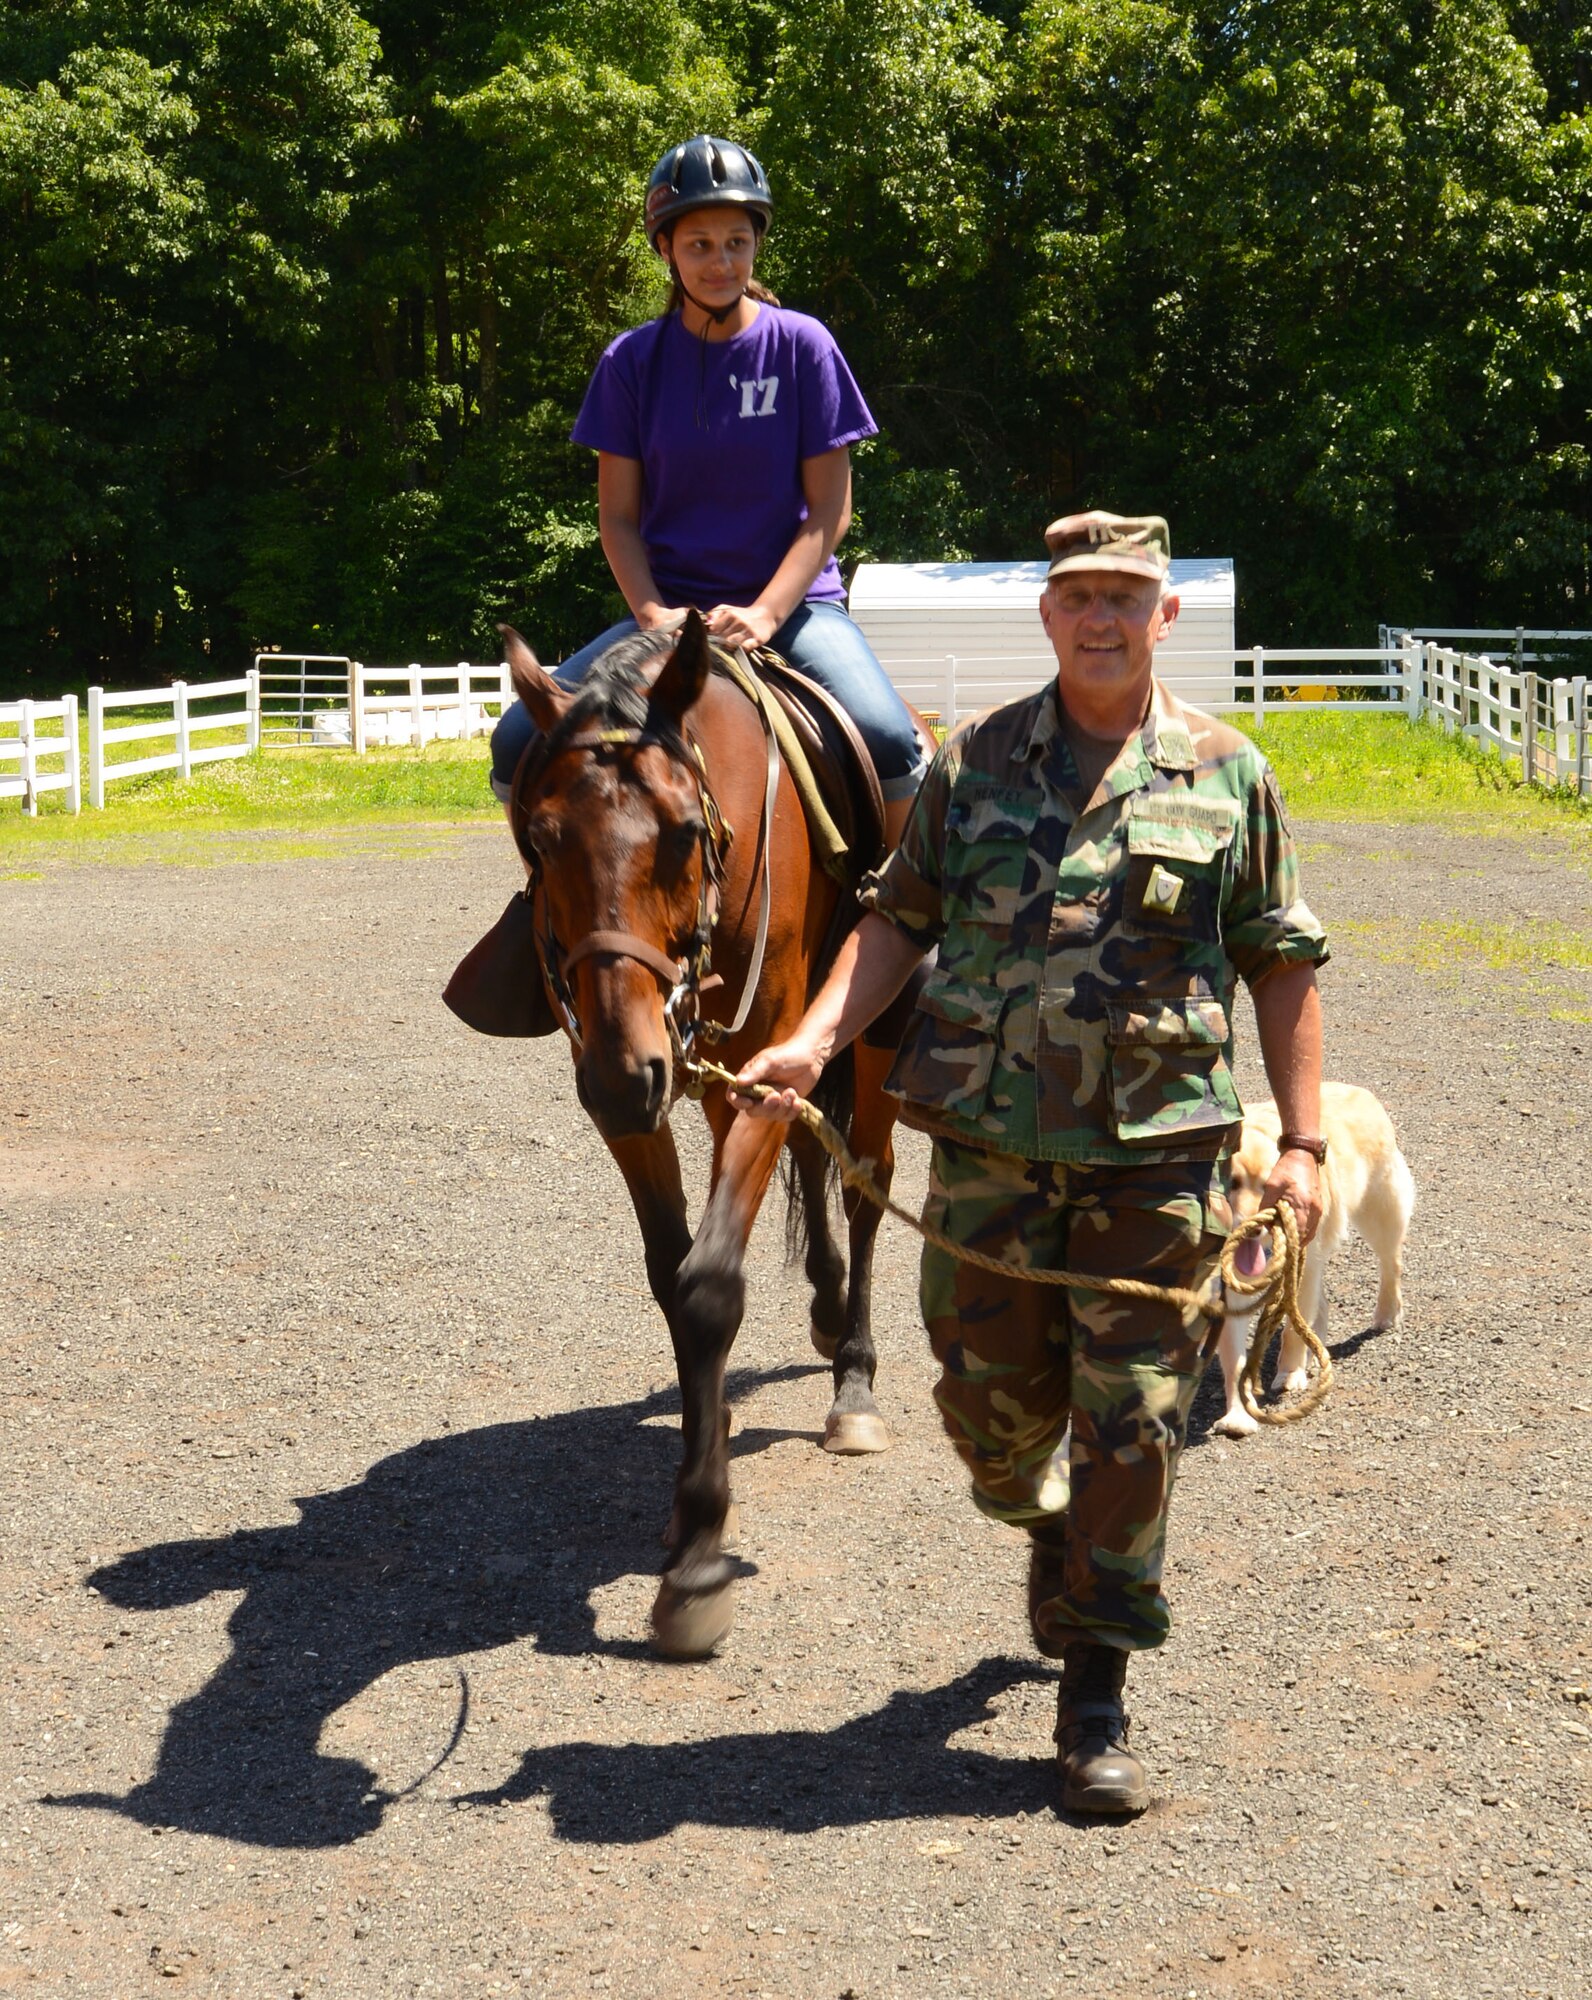 Gabrielle Martucci, 14, rides horse, Wes, as Capt. Edward Henfey, commanding officer of the First Company Governor's Horse Guard, leads the way in Avon, Conn., June 21, 2014. Gabrielle was a participant in the Horses to Homecoming program, which helps military children reconnect with their parents. (U.S. Air National Guard photo by Senior Airman Jennifer Pierce)